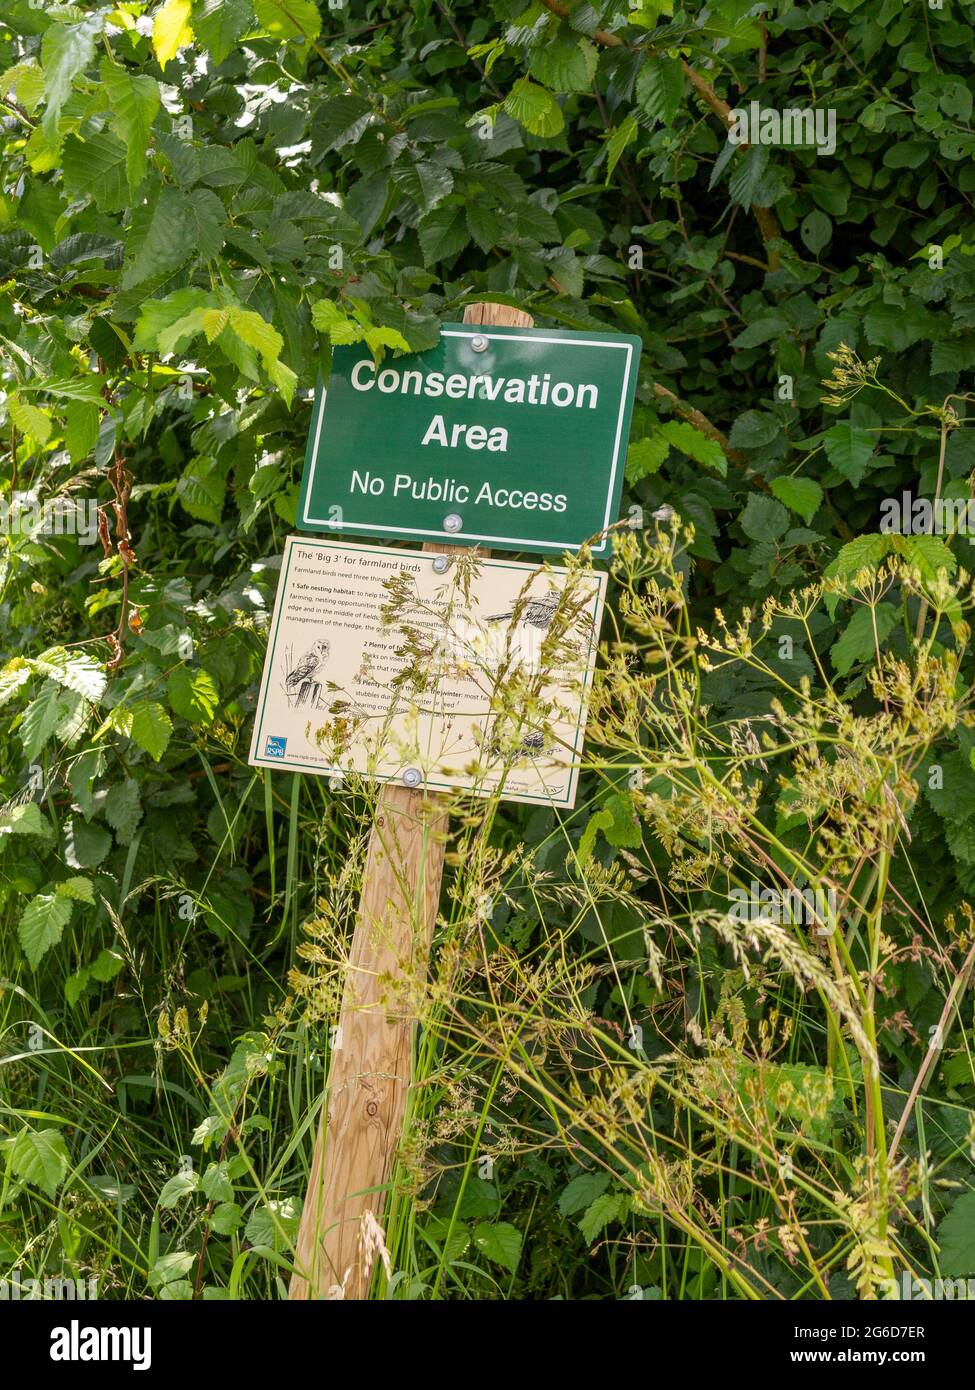 A green rectangular 'Conservation Area' sign on a wooden post in a hedge by a field area Stock Photo